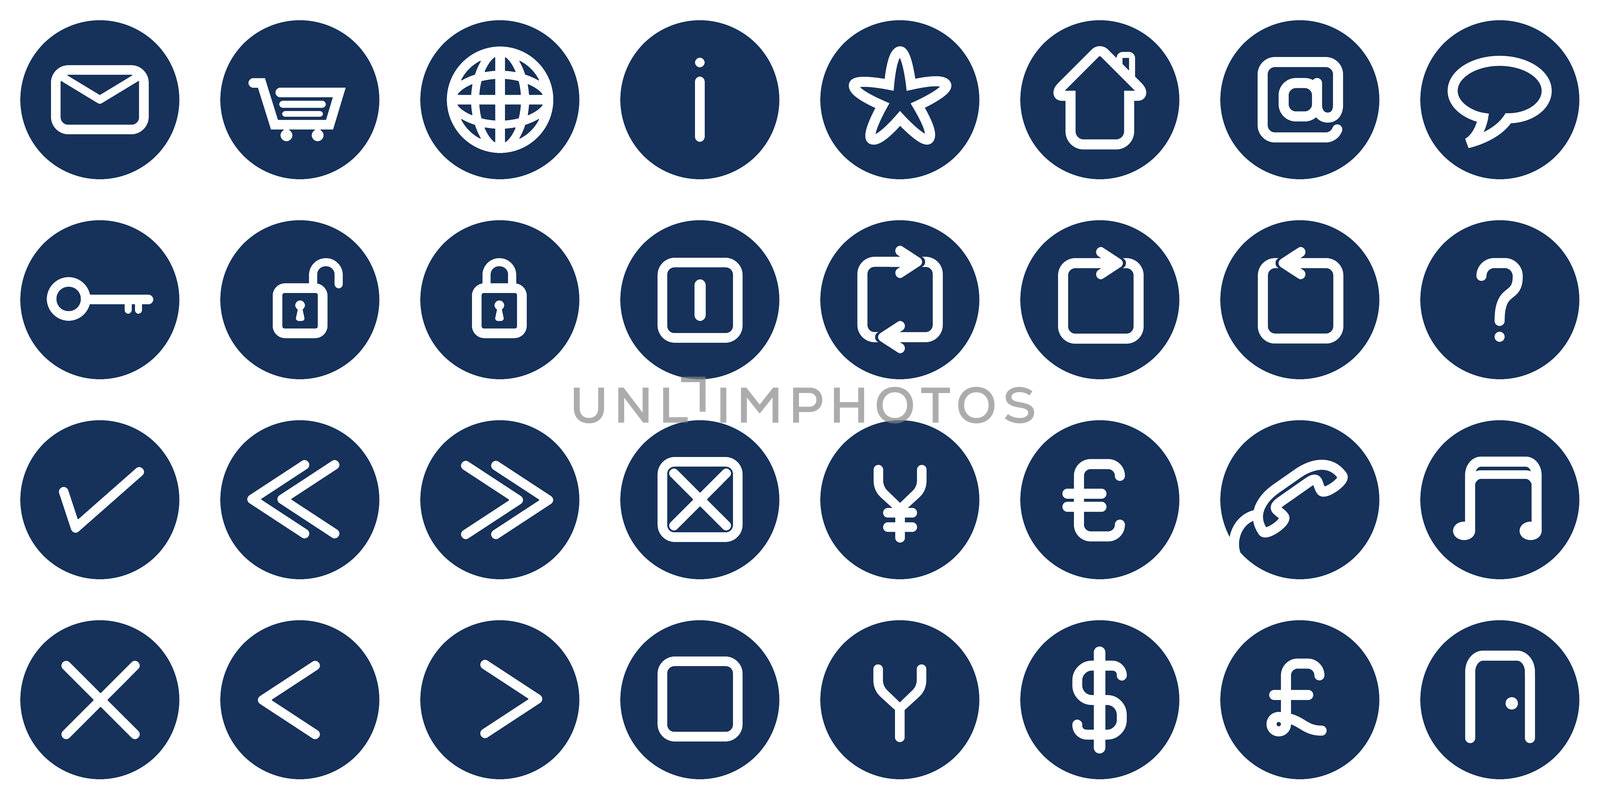 Internet/Online Applications Icon Set/Buttons